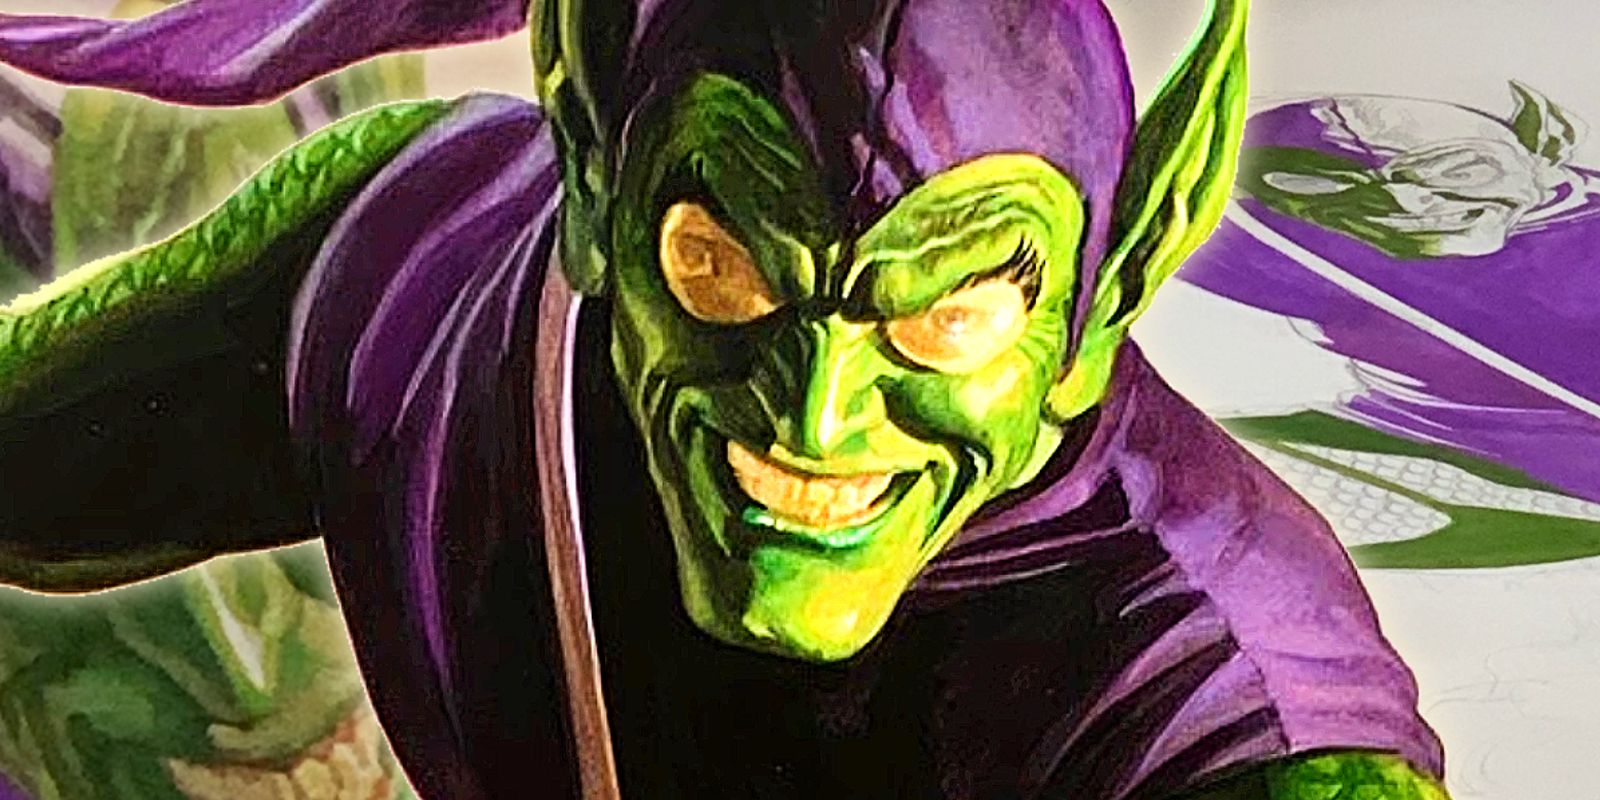 Green Goblin smiles in Marvel Comics illustrated by Alex Ross